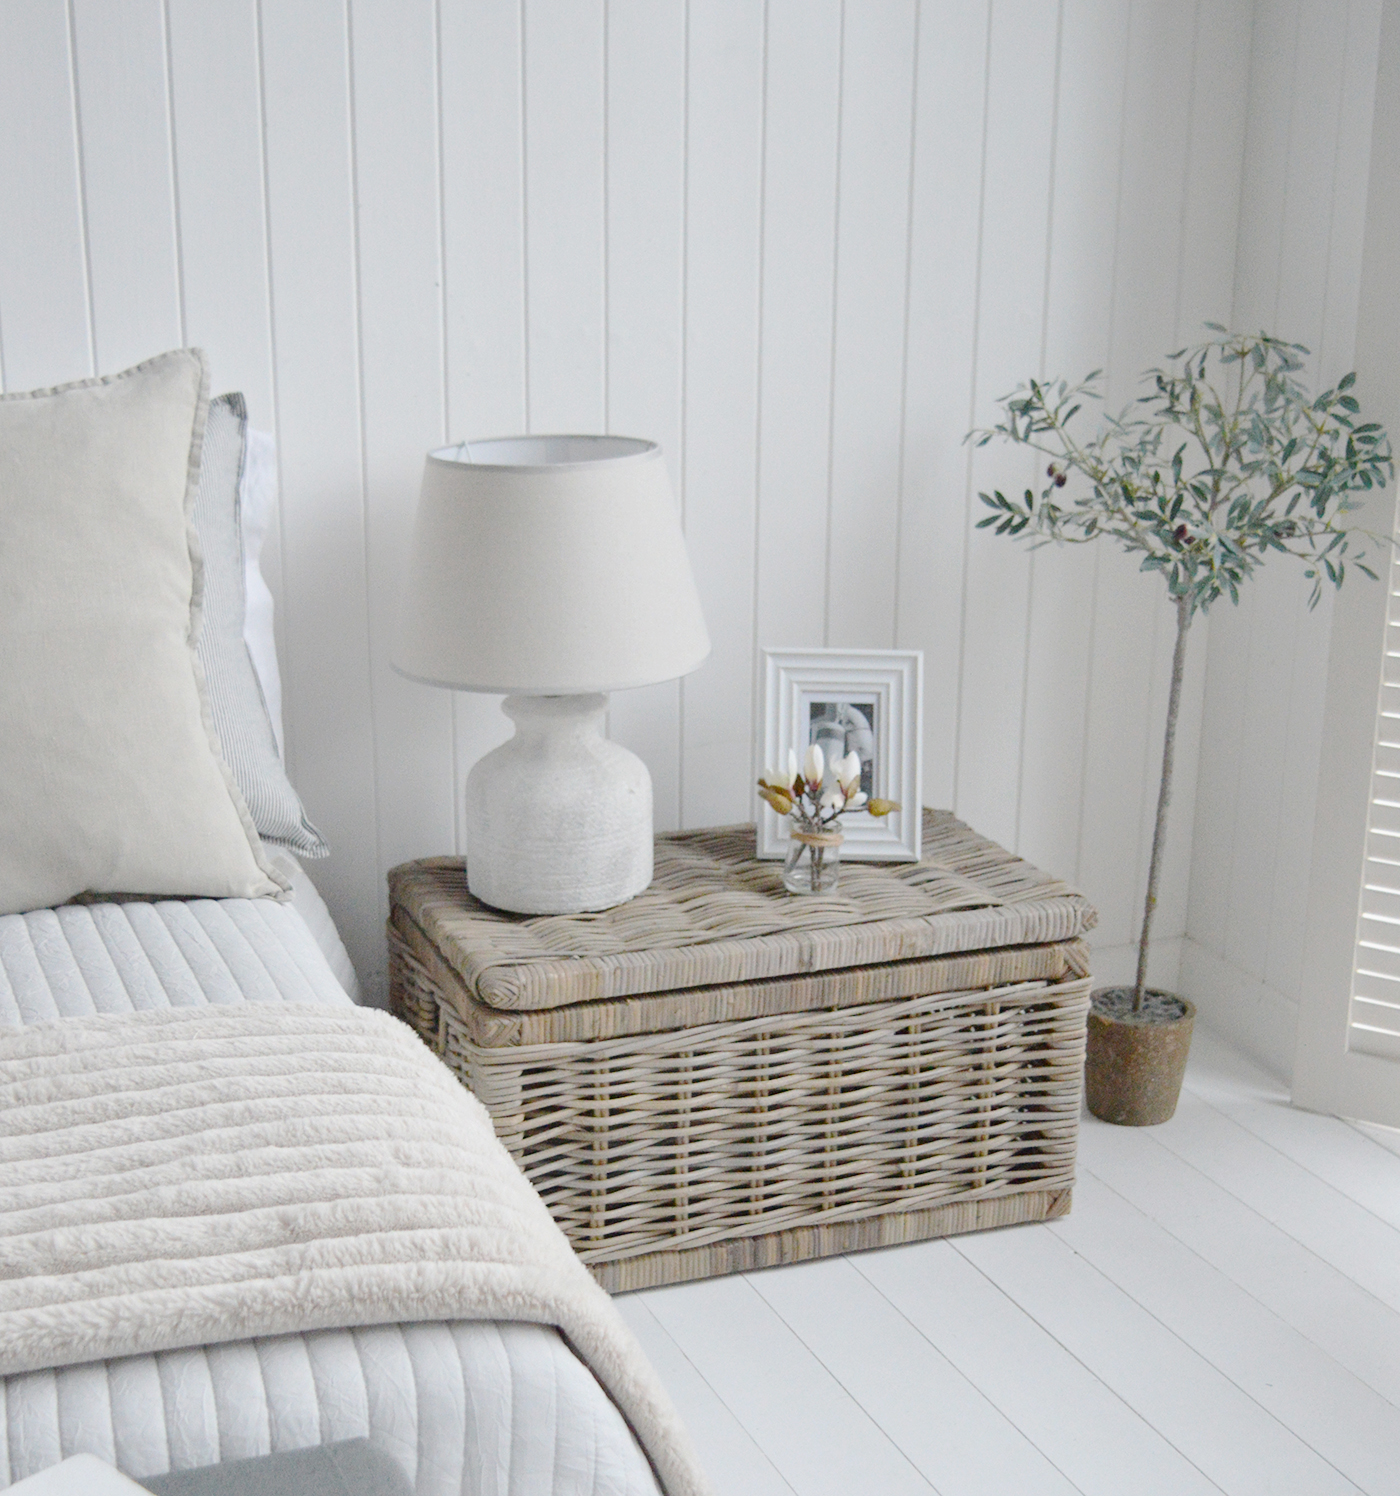 The Seaside Basket as a bedside table to give texture to add warmth as well as extra storage